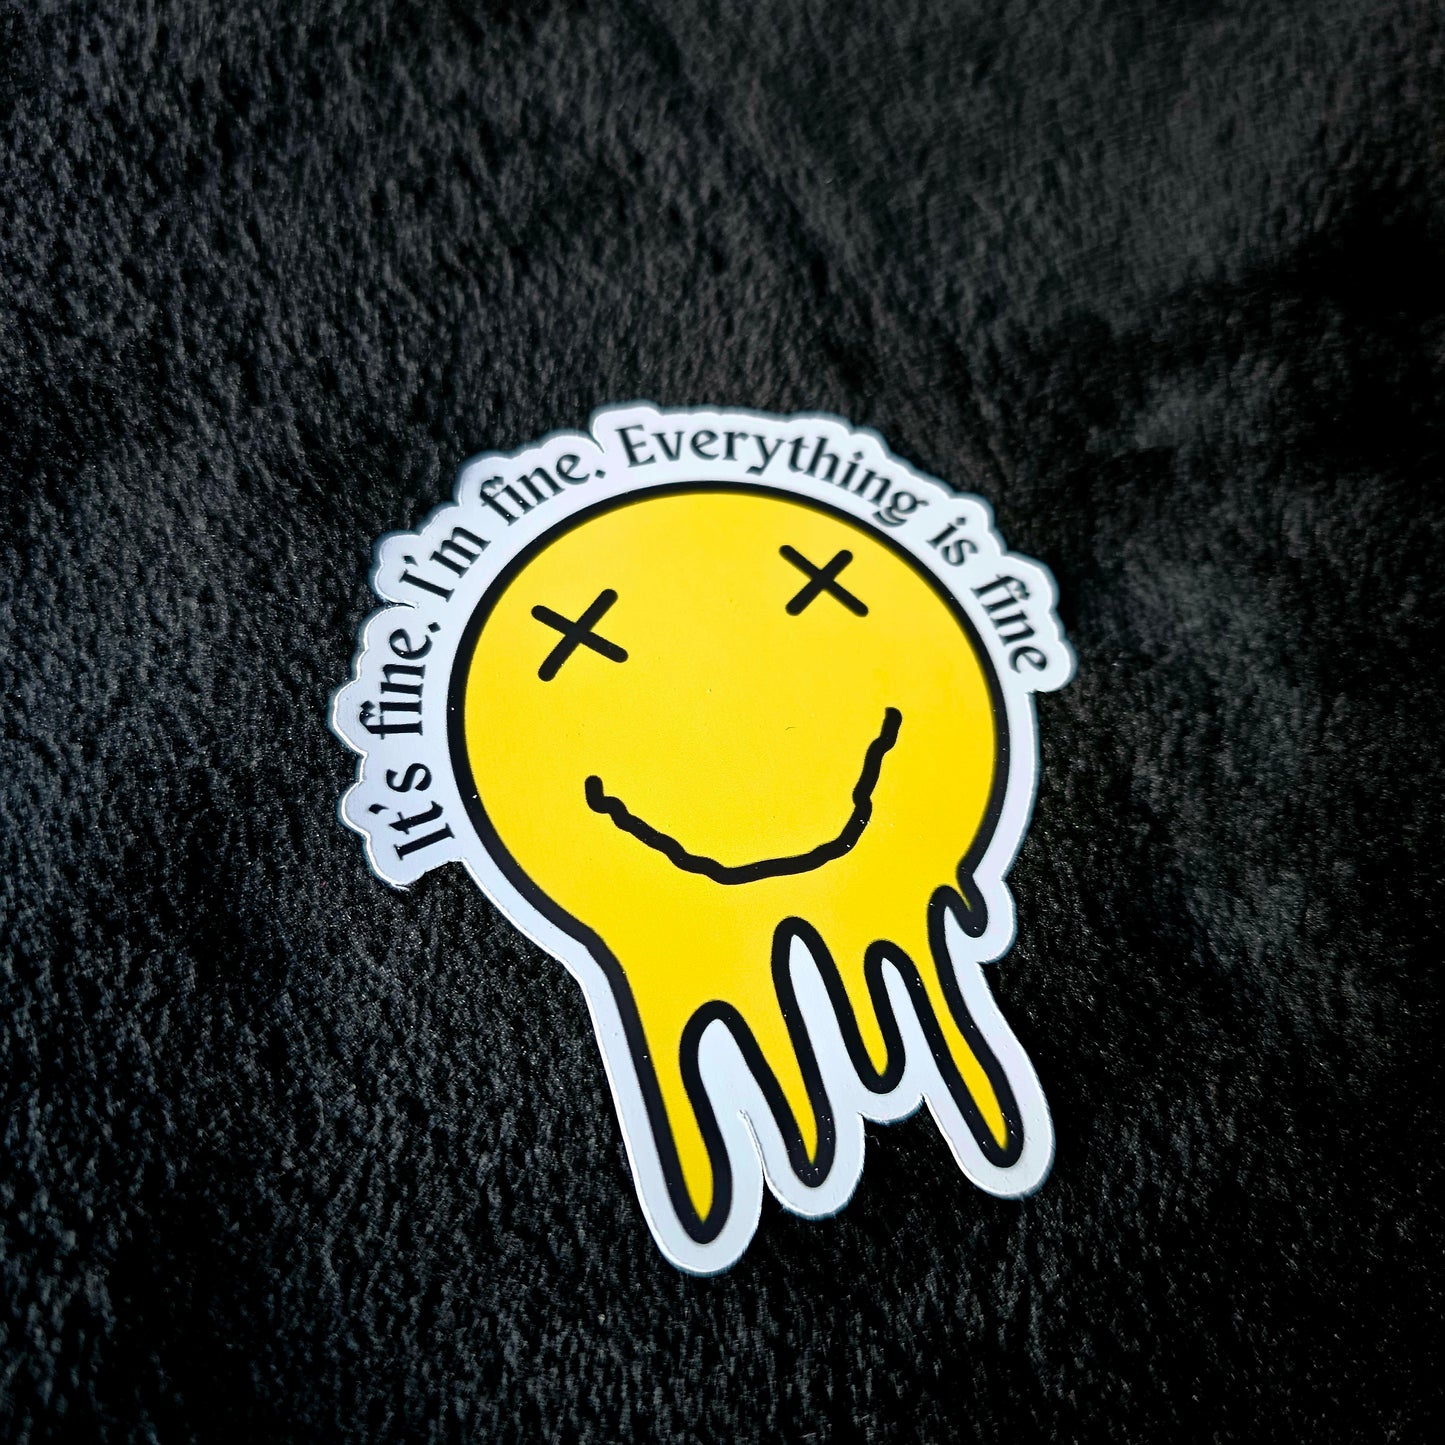 It's All Fine - Waterproof Vinyl Stickers - Durable Decals for Laptops, Skateboards, and Outdoor Gear